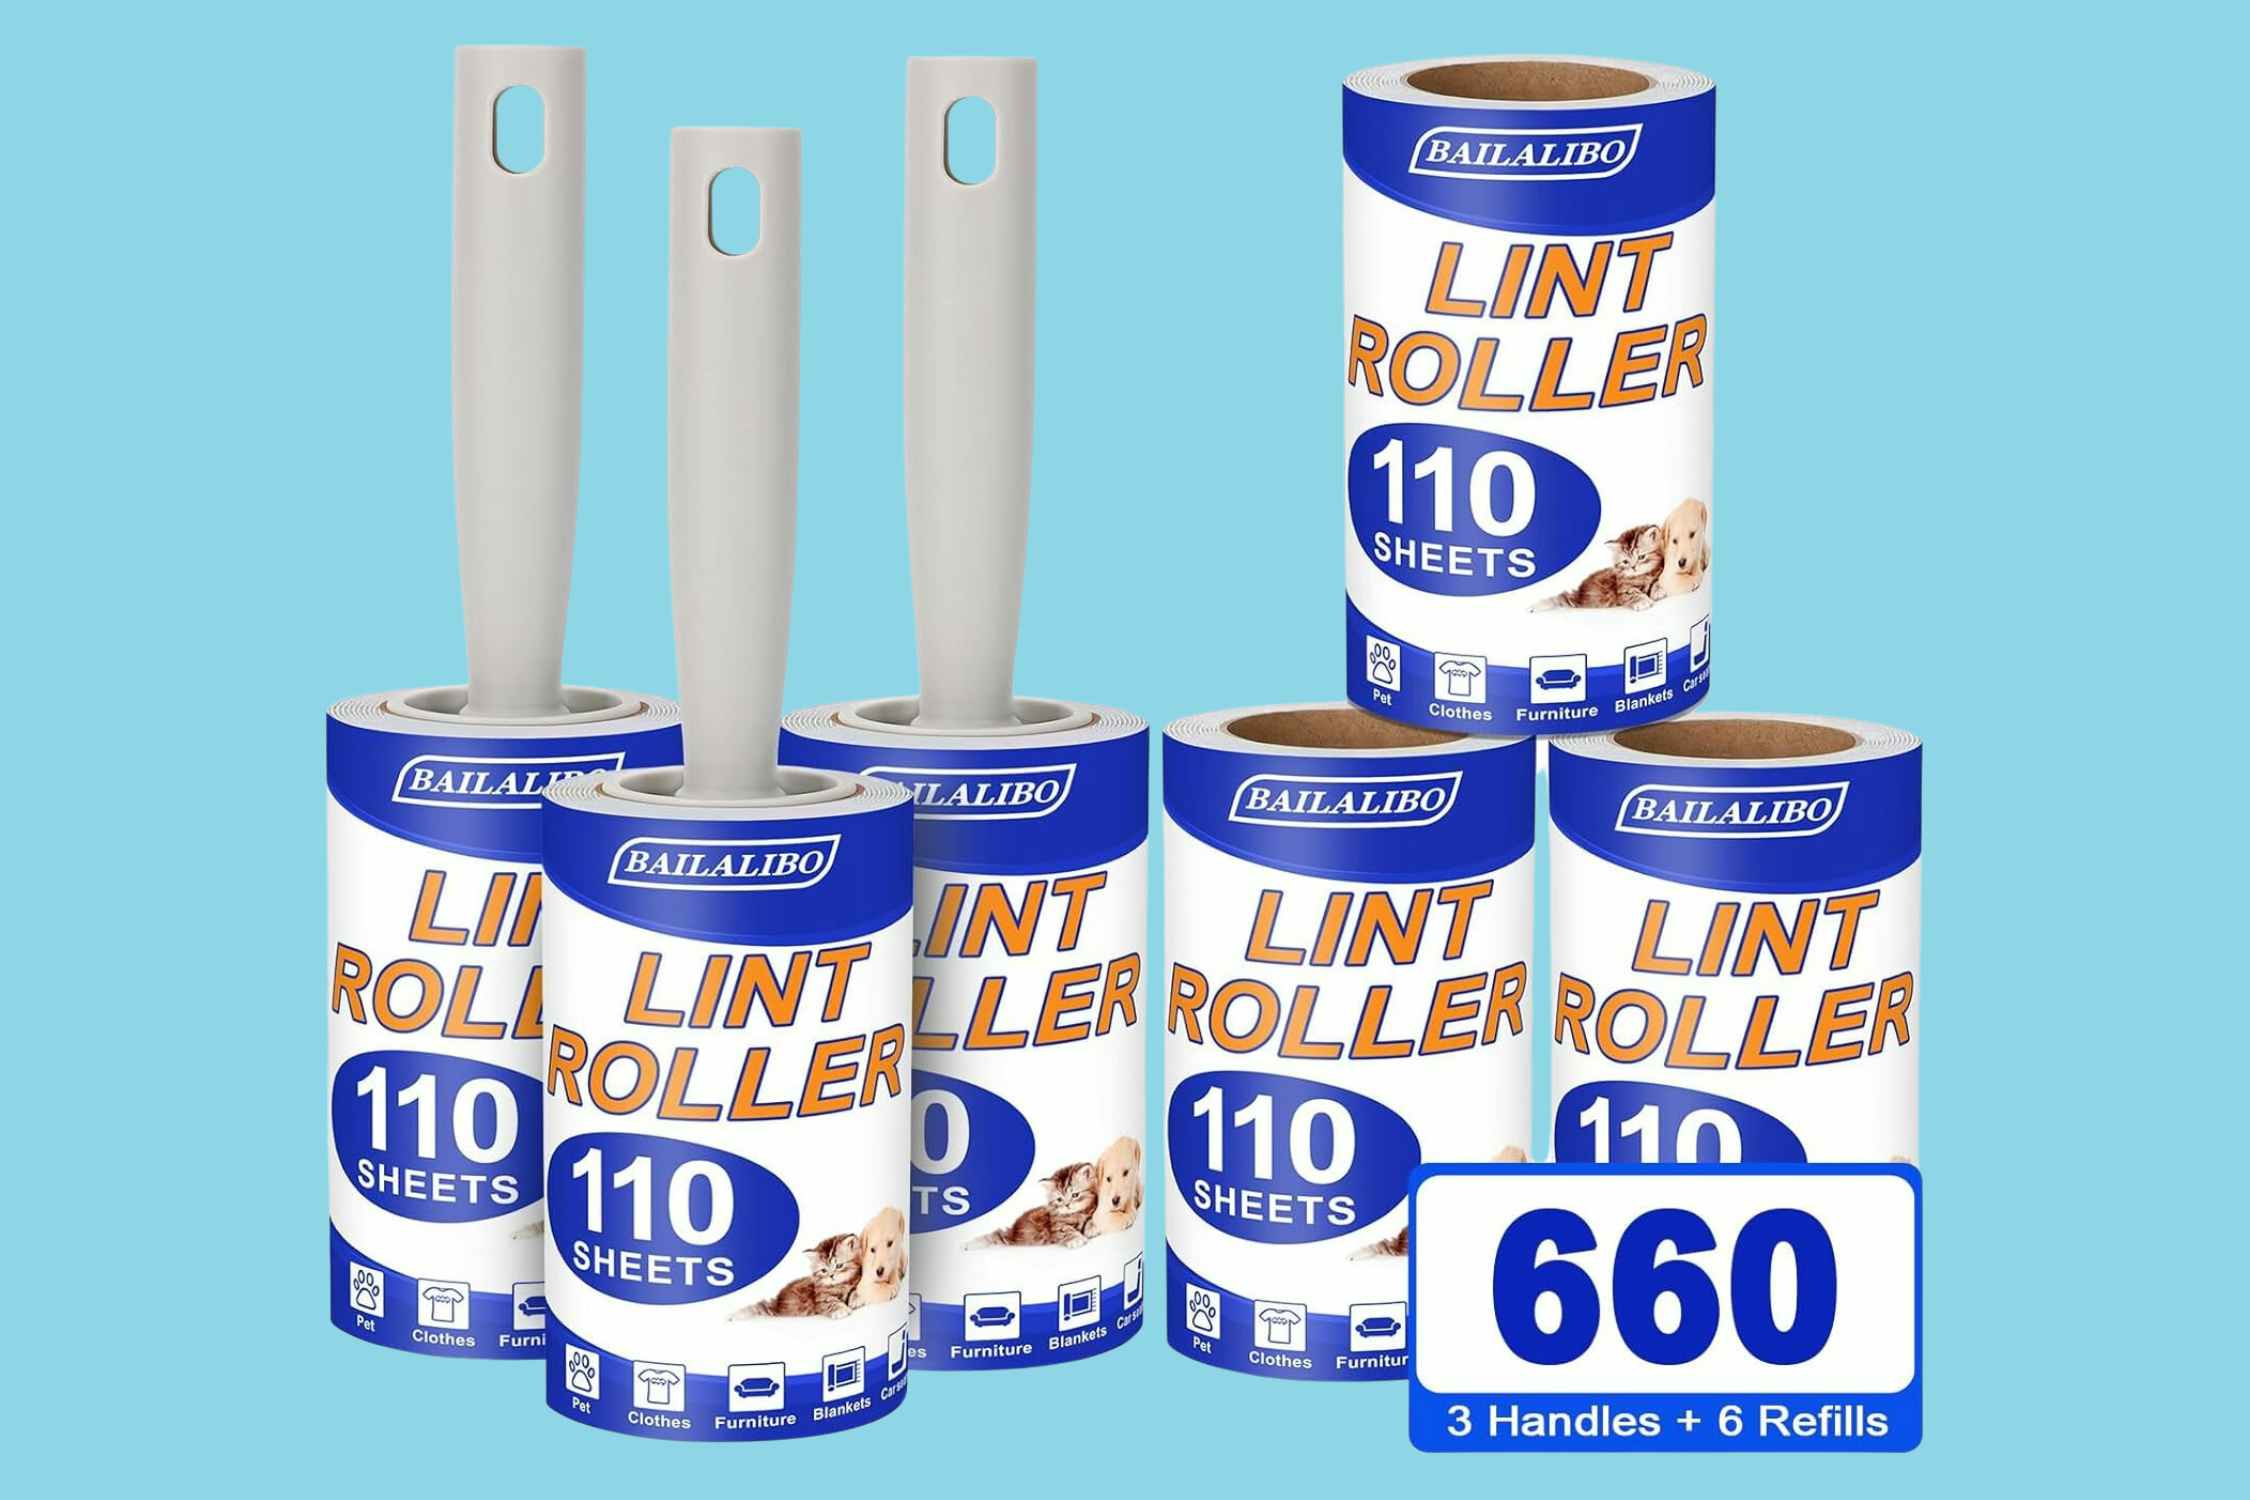 Lint Rollers: Get 3 Rollers and 6 Refills for $6.99 on Amazon